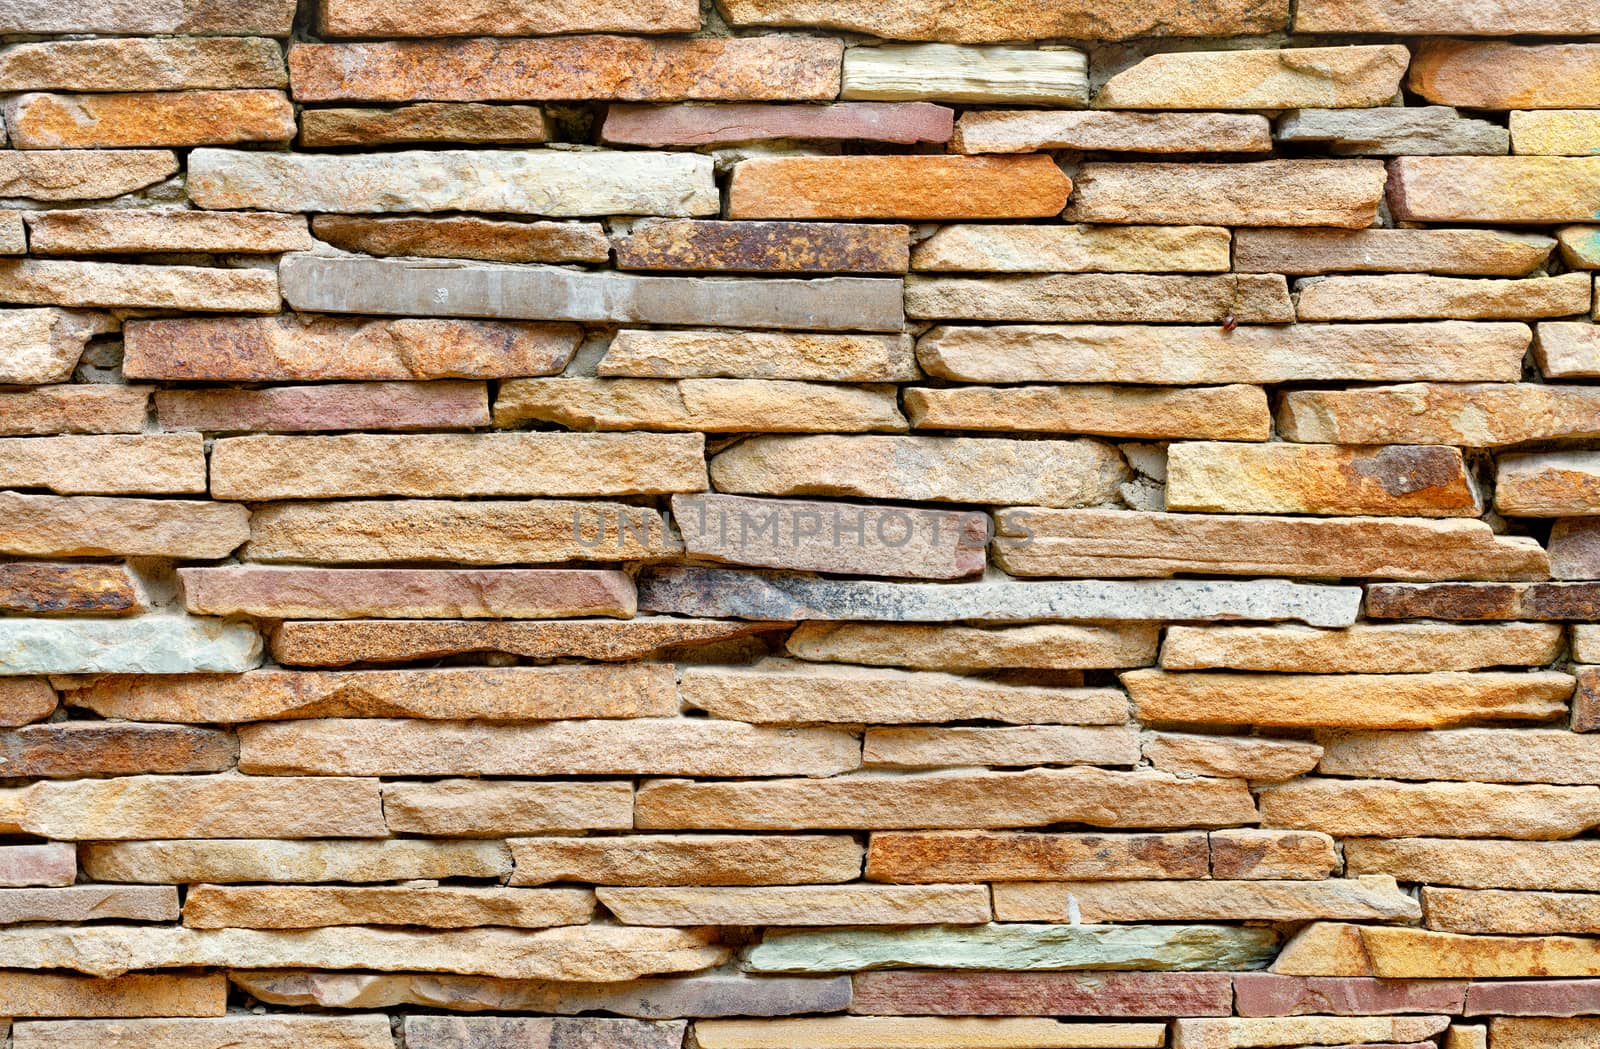 The stone wall is lined with pieces of old flat gold sandstone. by Sergii